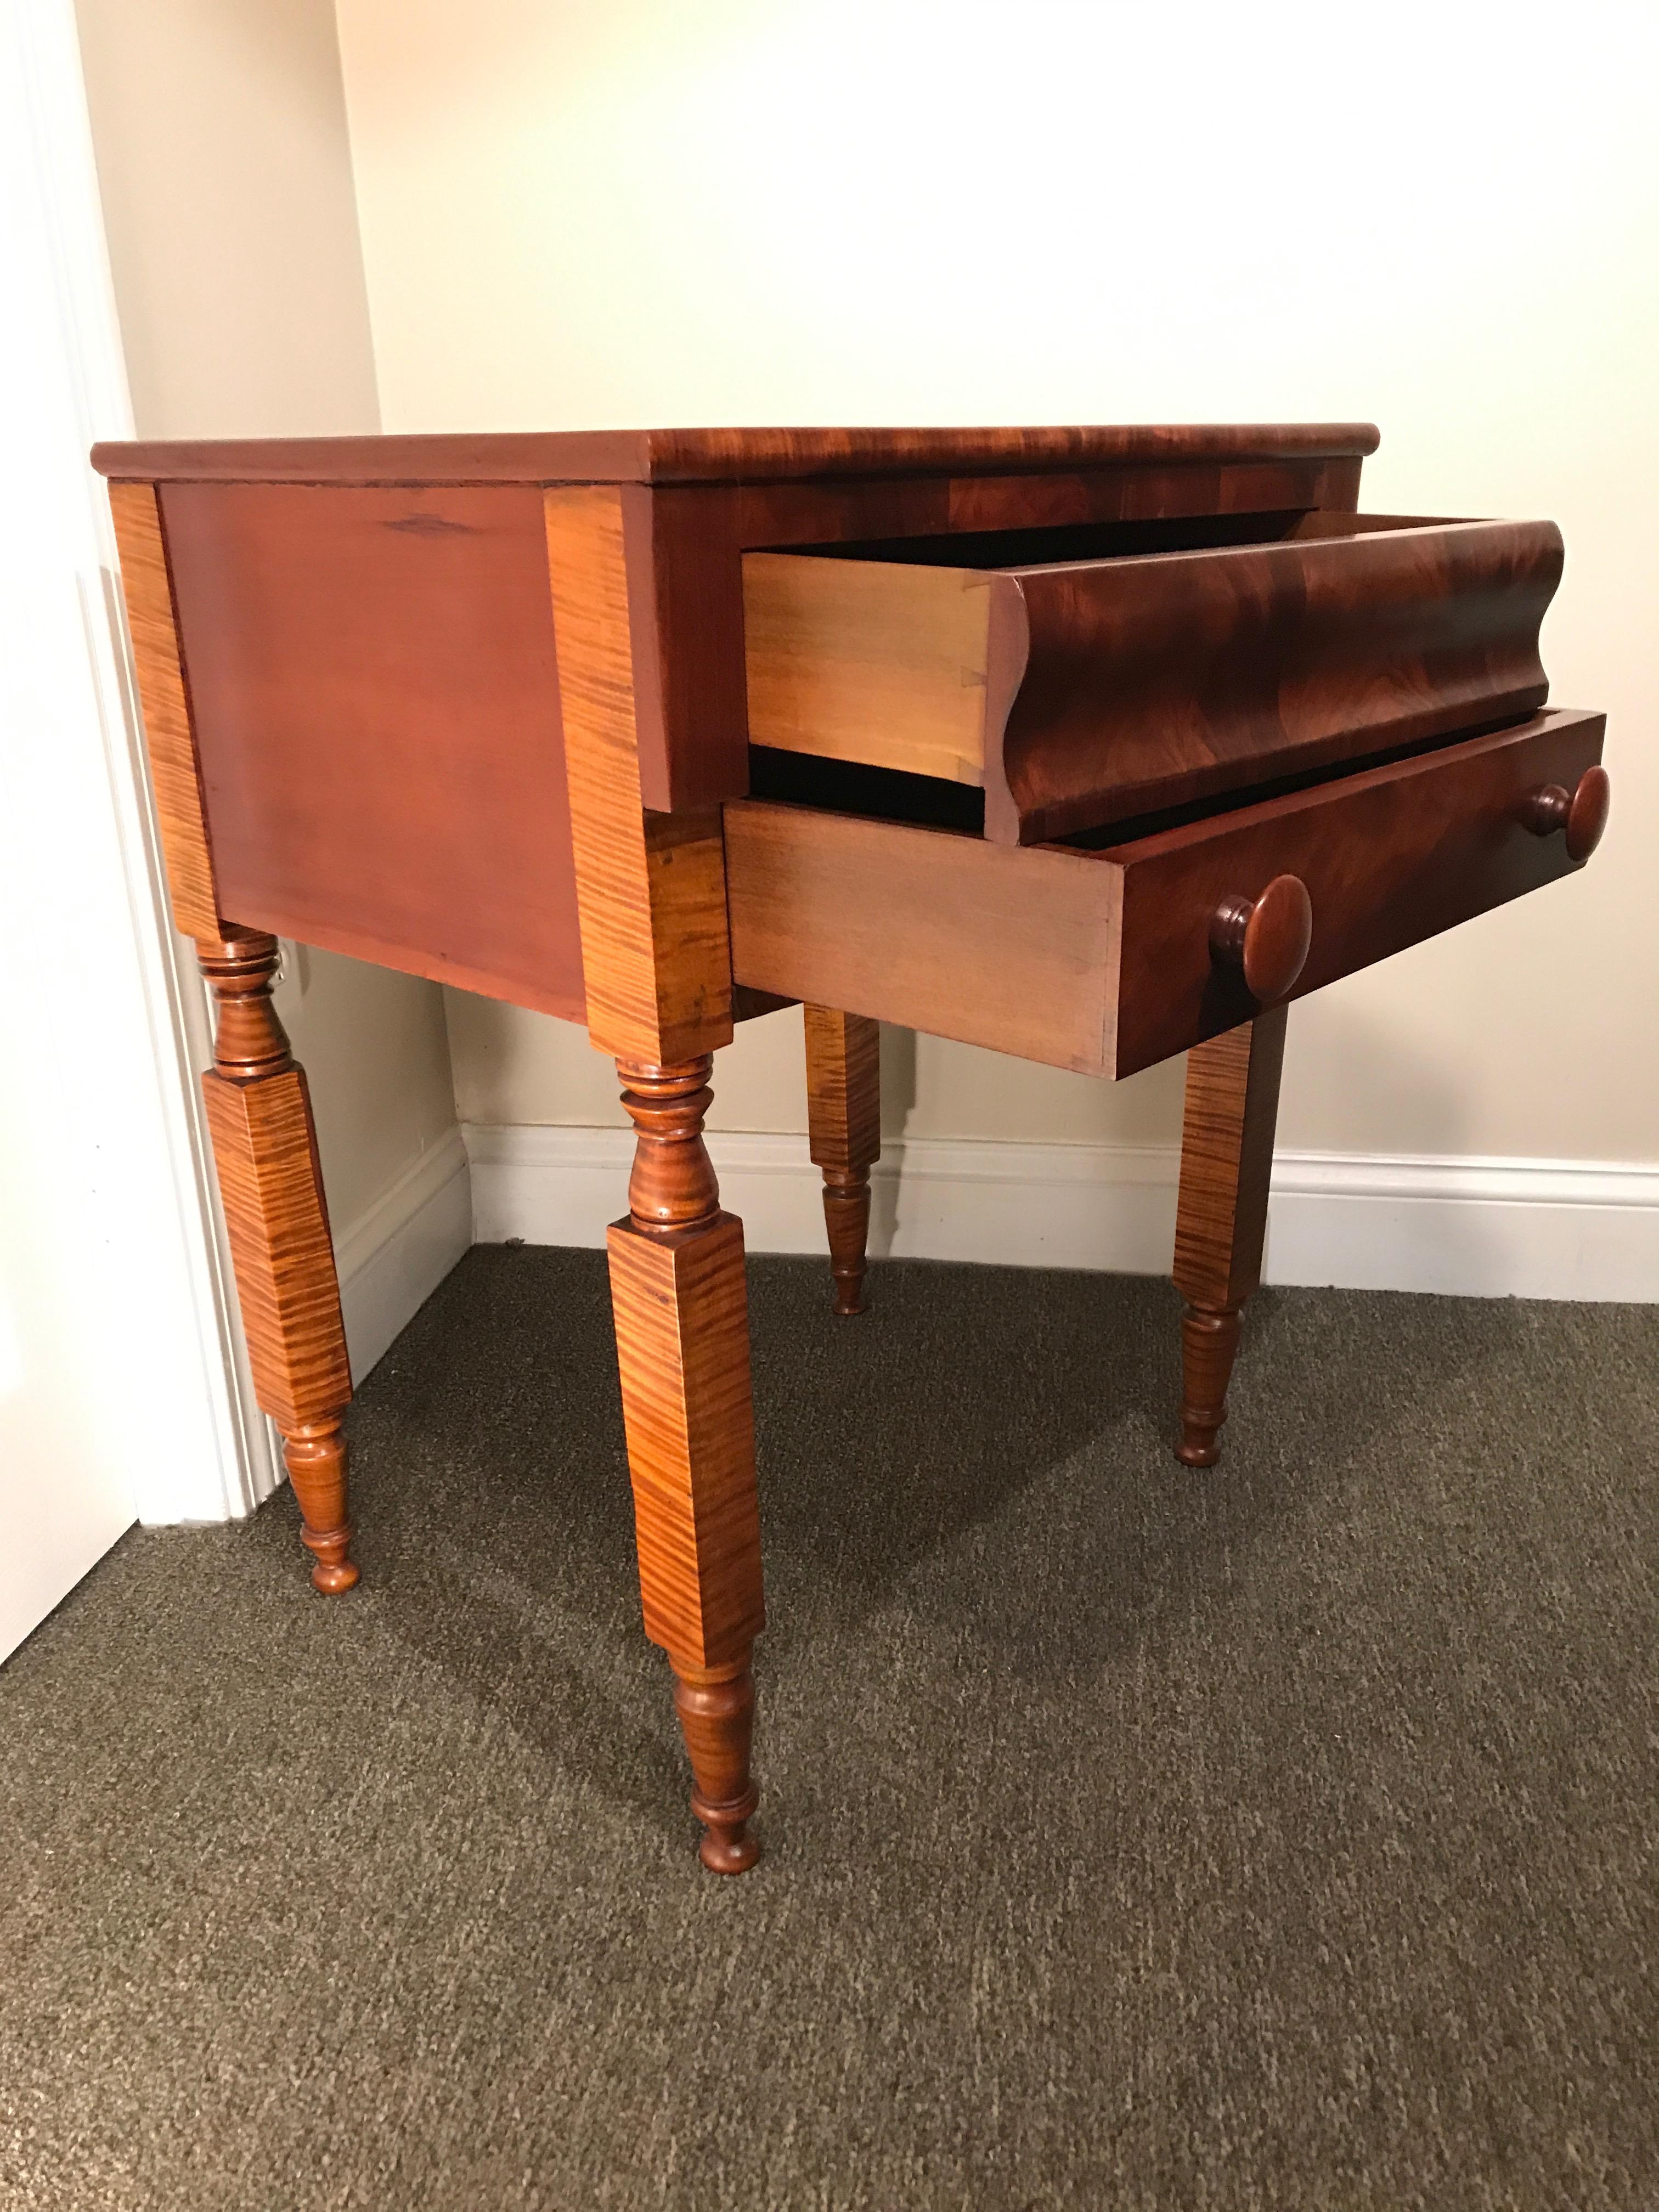 Turned Empire 2-Drawer Stand in Tiger Maple, Cherry and Flamed Mahogany, circa 1820